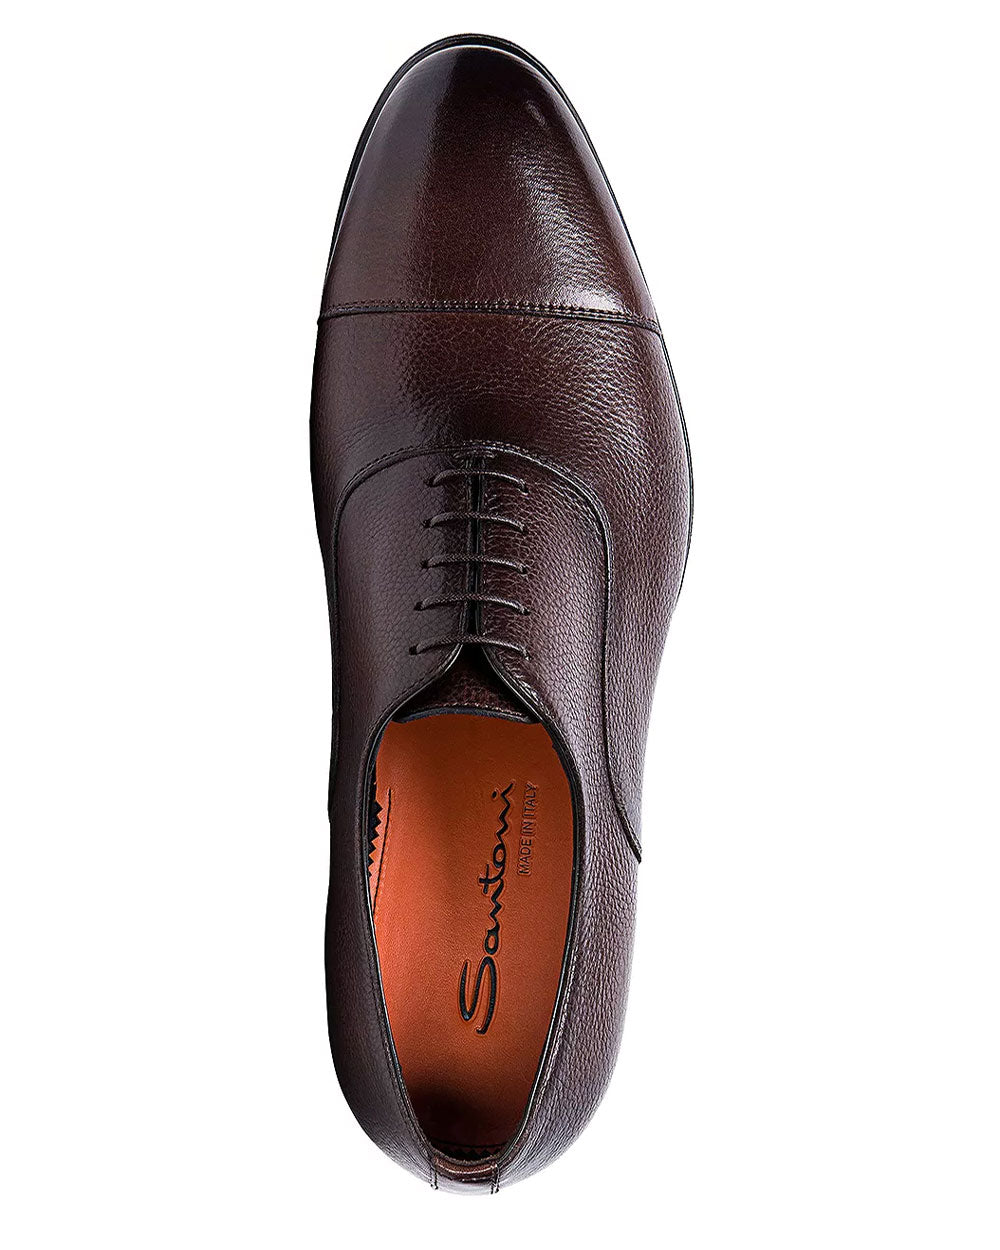 Darian Lace Up Oxford in Dark Brown